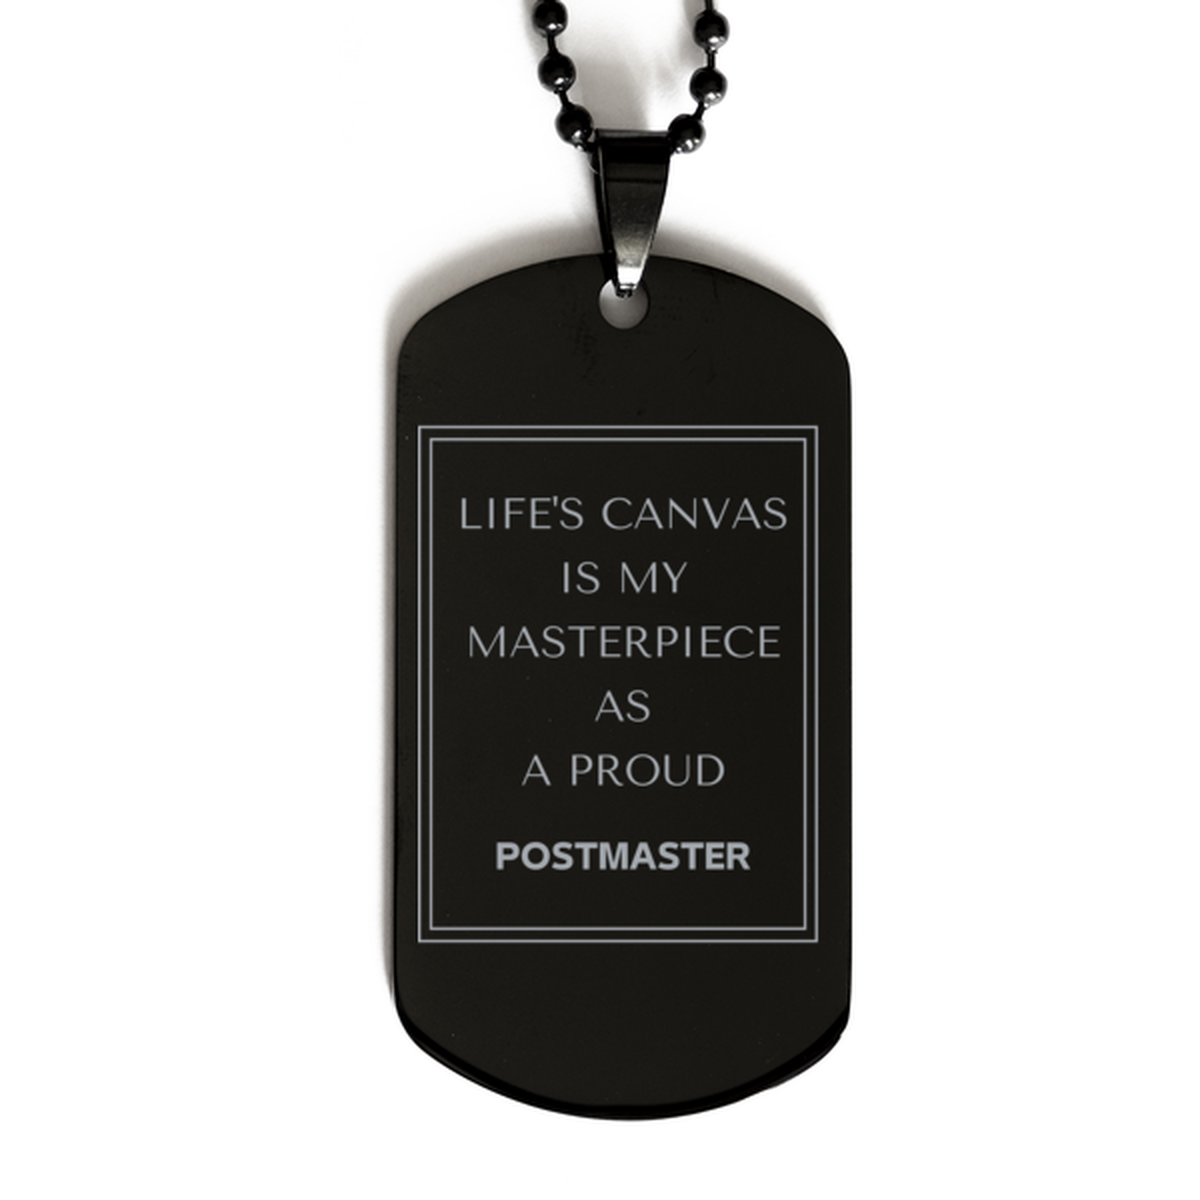 Proud Postmaster Gifts, Life's canvas is my masterpiece, Epic Birthday Christmas Unique Black Dog Tag For Postmaster, Coworkers, Men, Women, Friends